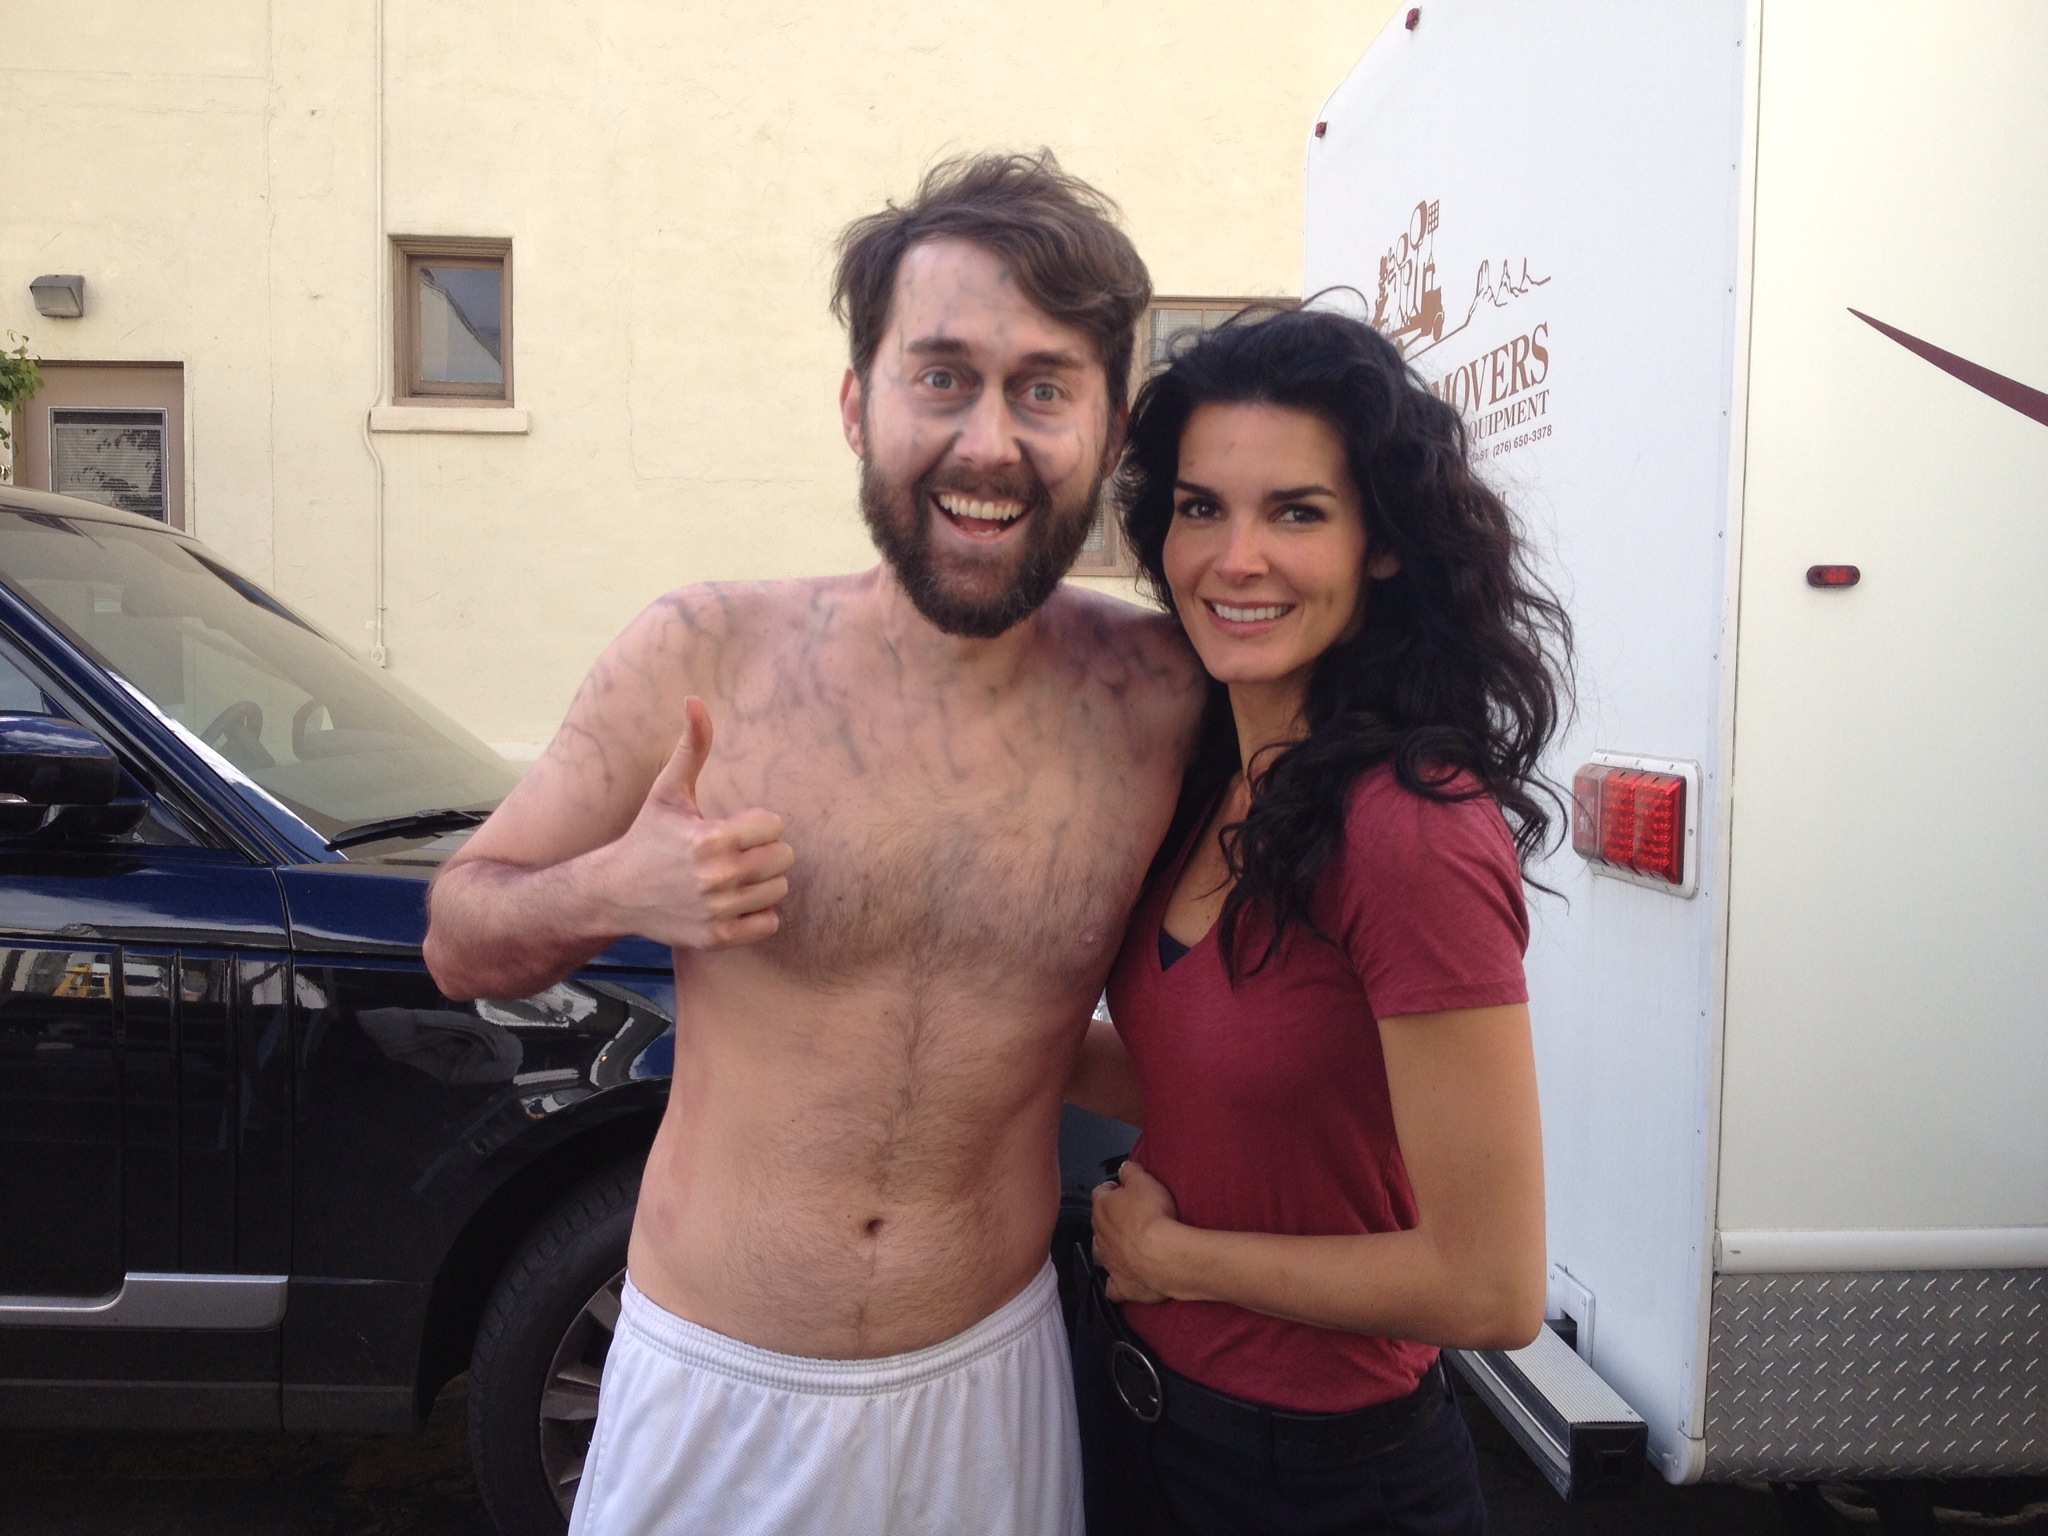 Hayes Hargrove and Angie Harmon on Rizzoli & Isles